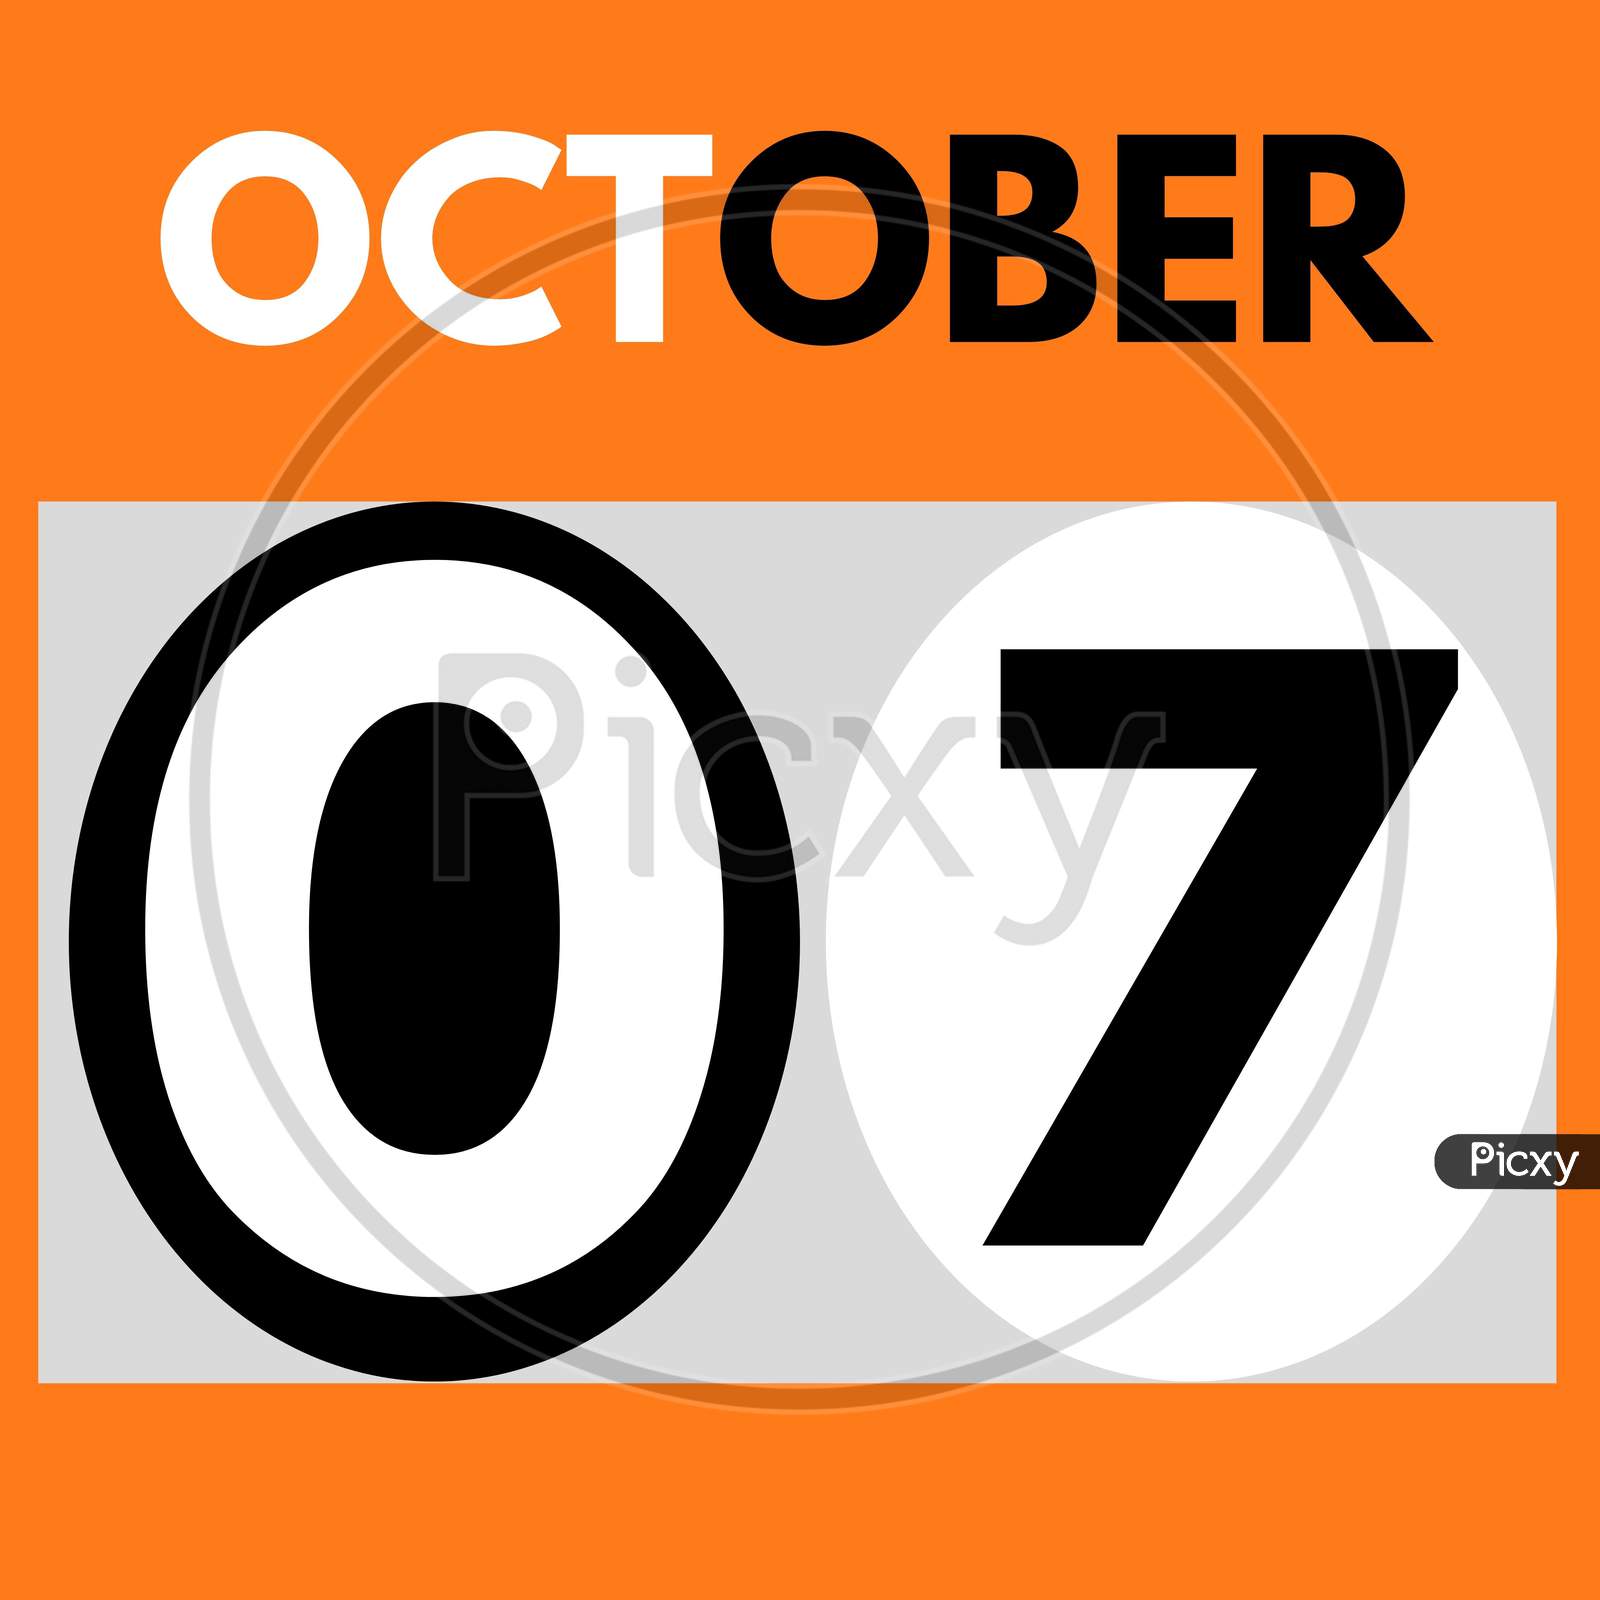 October 7 . Modern Daily Calendar Icon .Date ,Day, Month .Calendar For The Month Of October